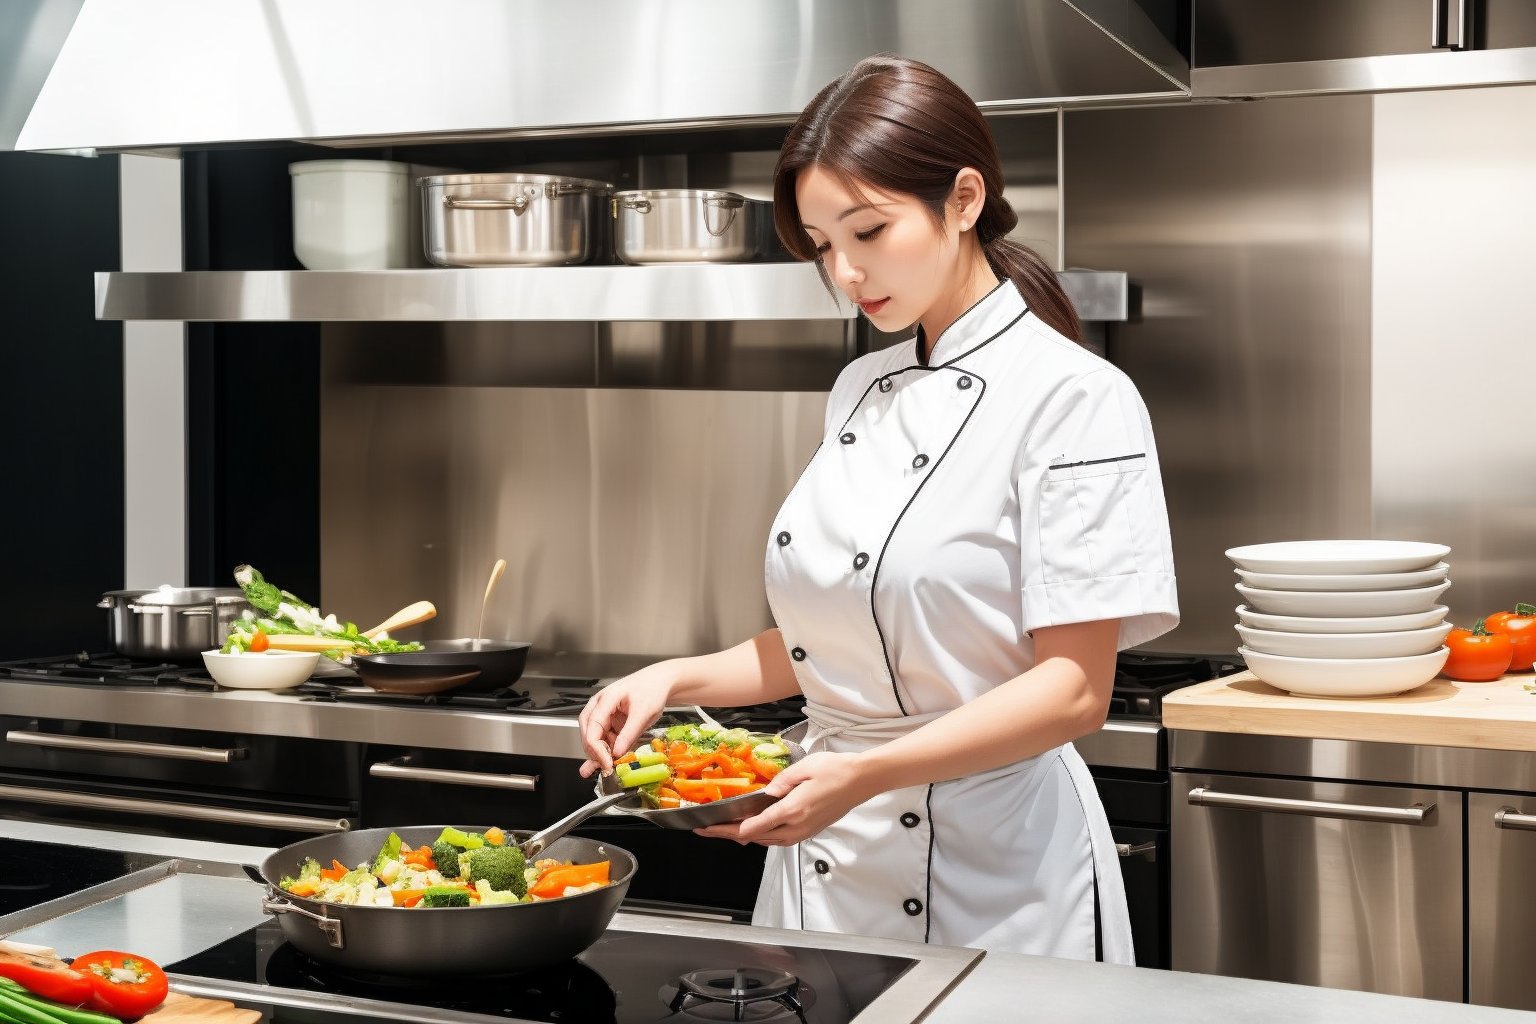 A beautiful female chef in her 20s is cooking vegetables in a frying pan in a clean restaurant kitchen. ((Chef uniform color is brown))